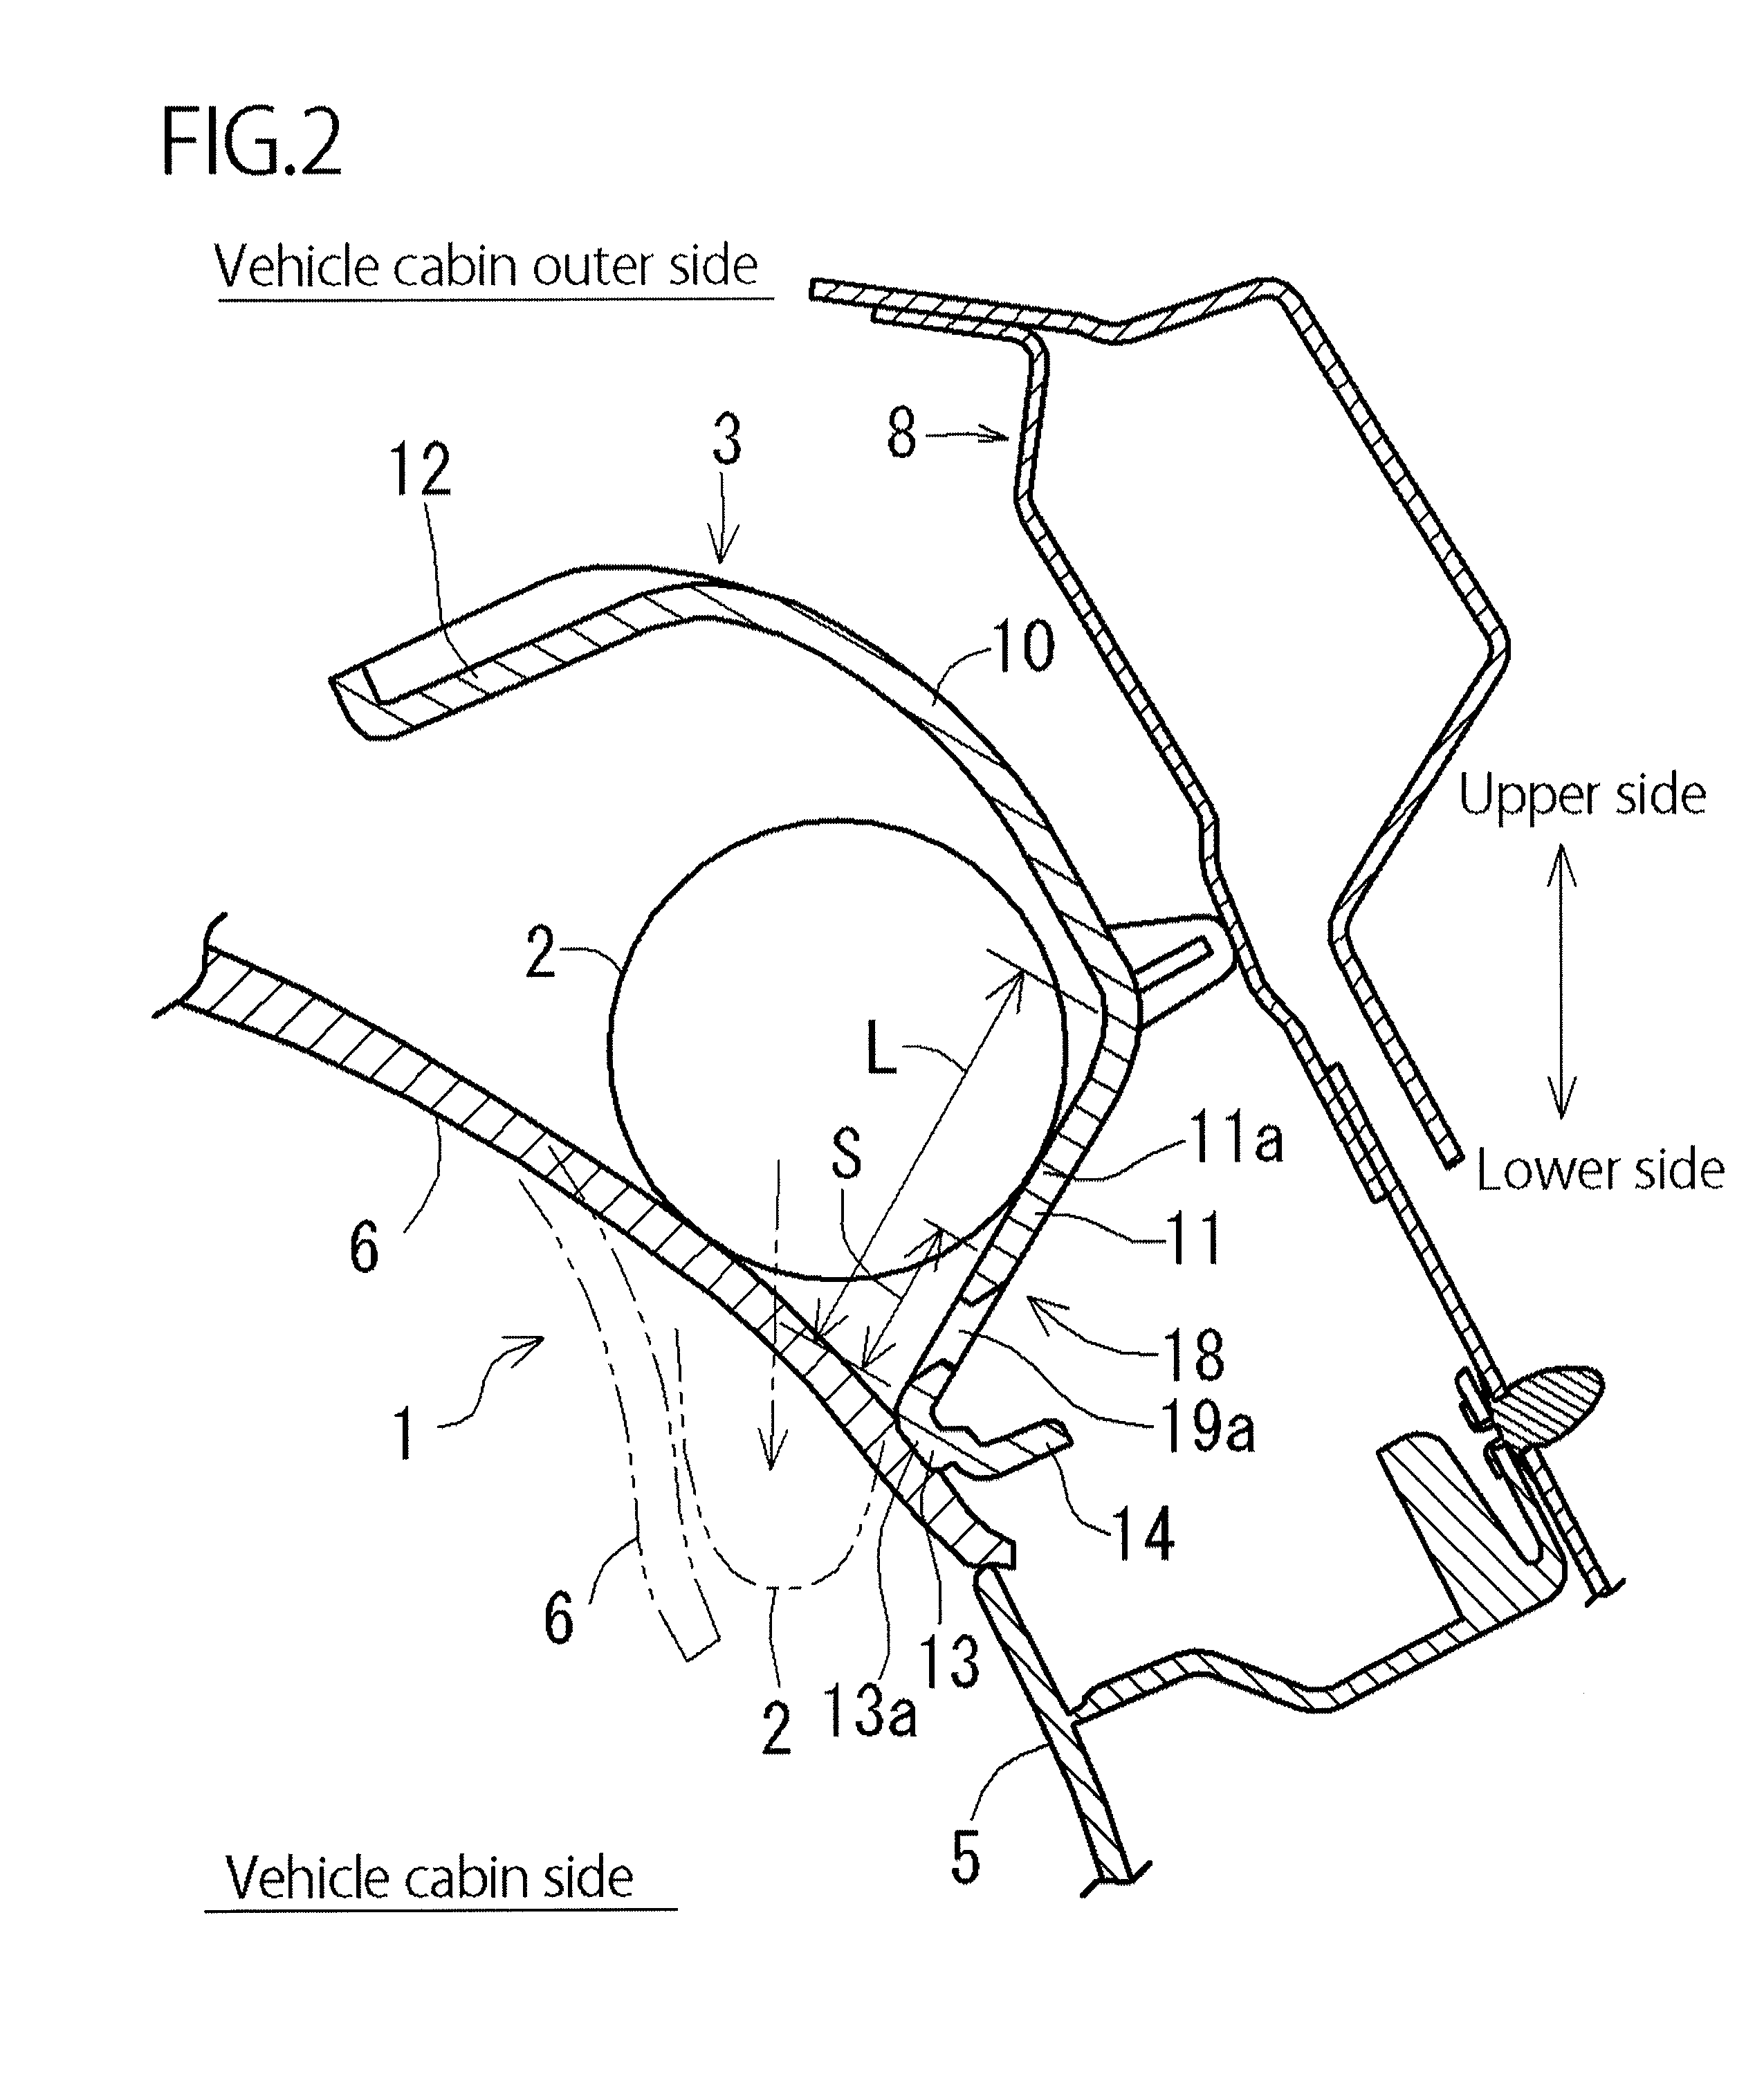 Head protection device and guiding bracket